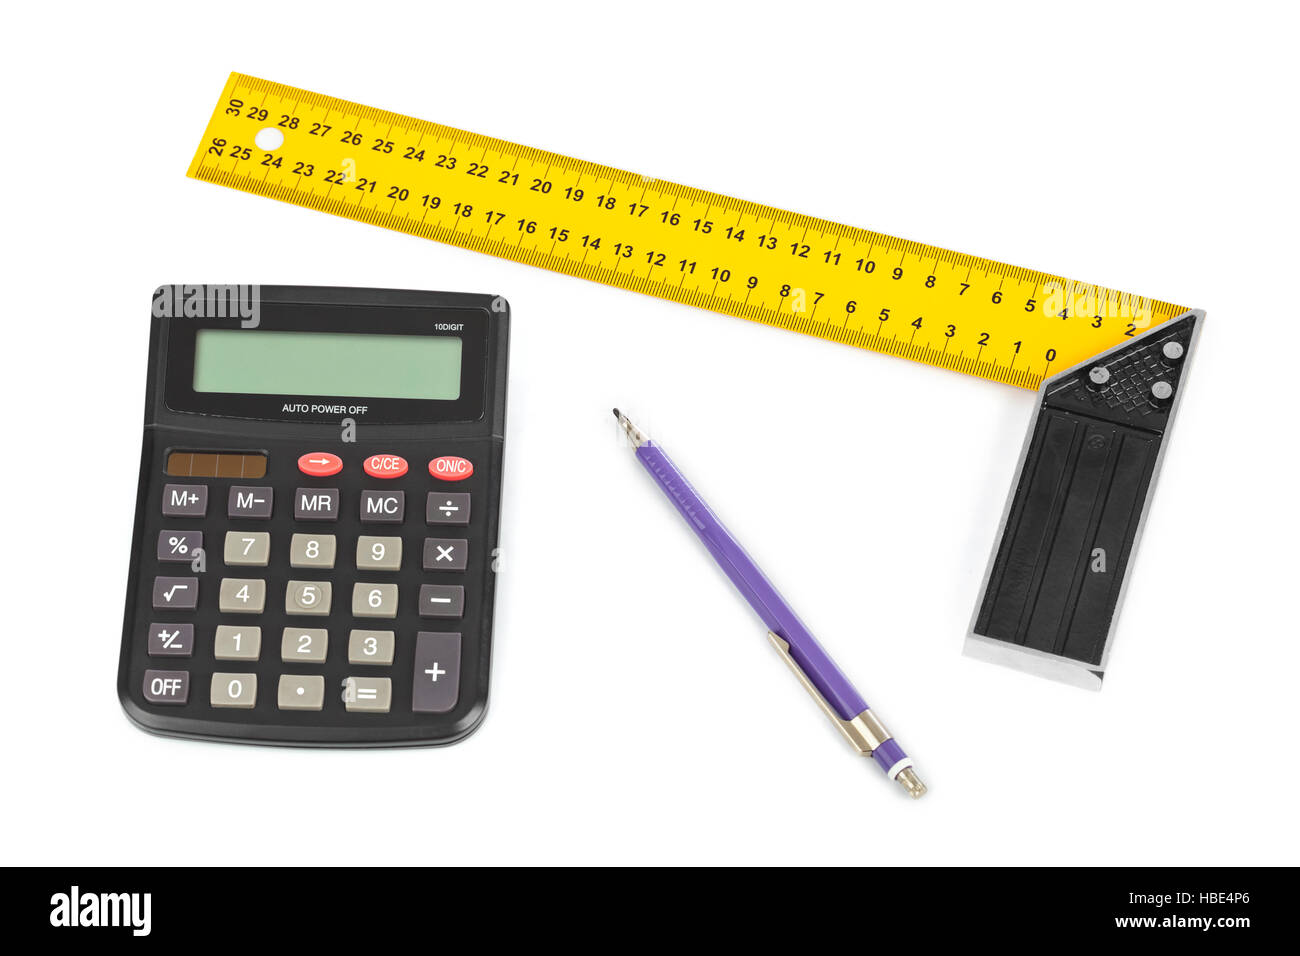 Architecture planning tools map pen pencil ruler calculator drawing compass  divider ; india ; asia Stock Photo - Alamy